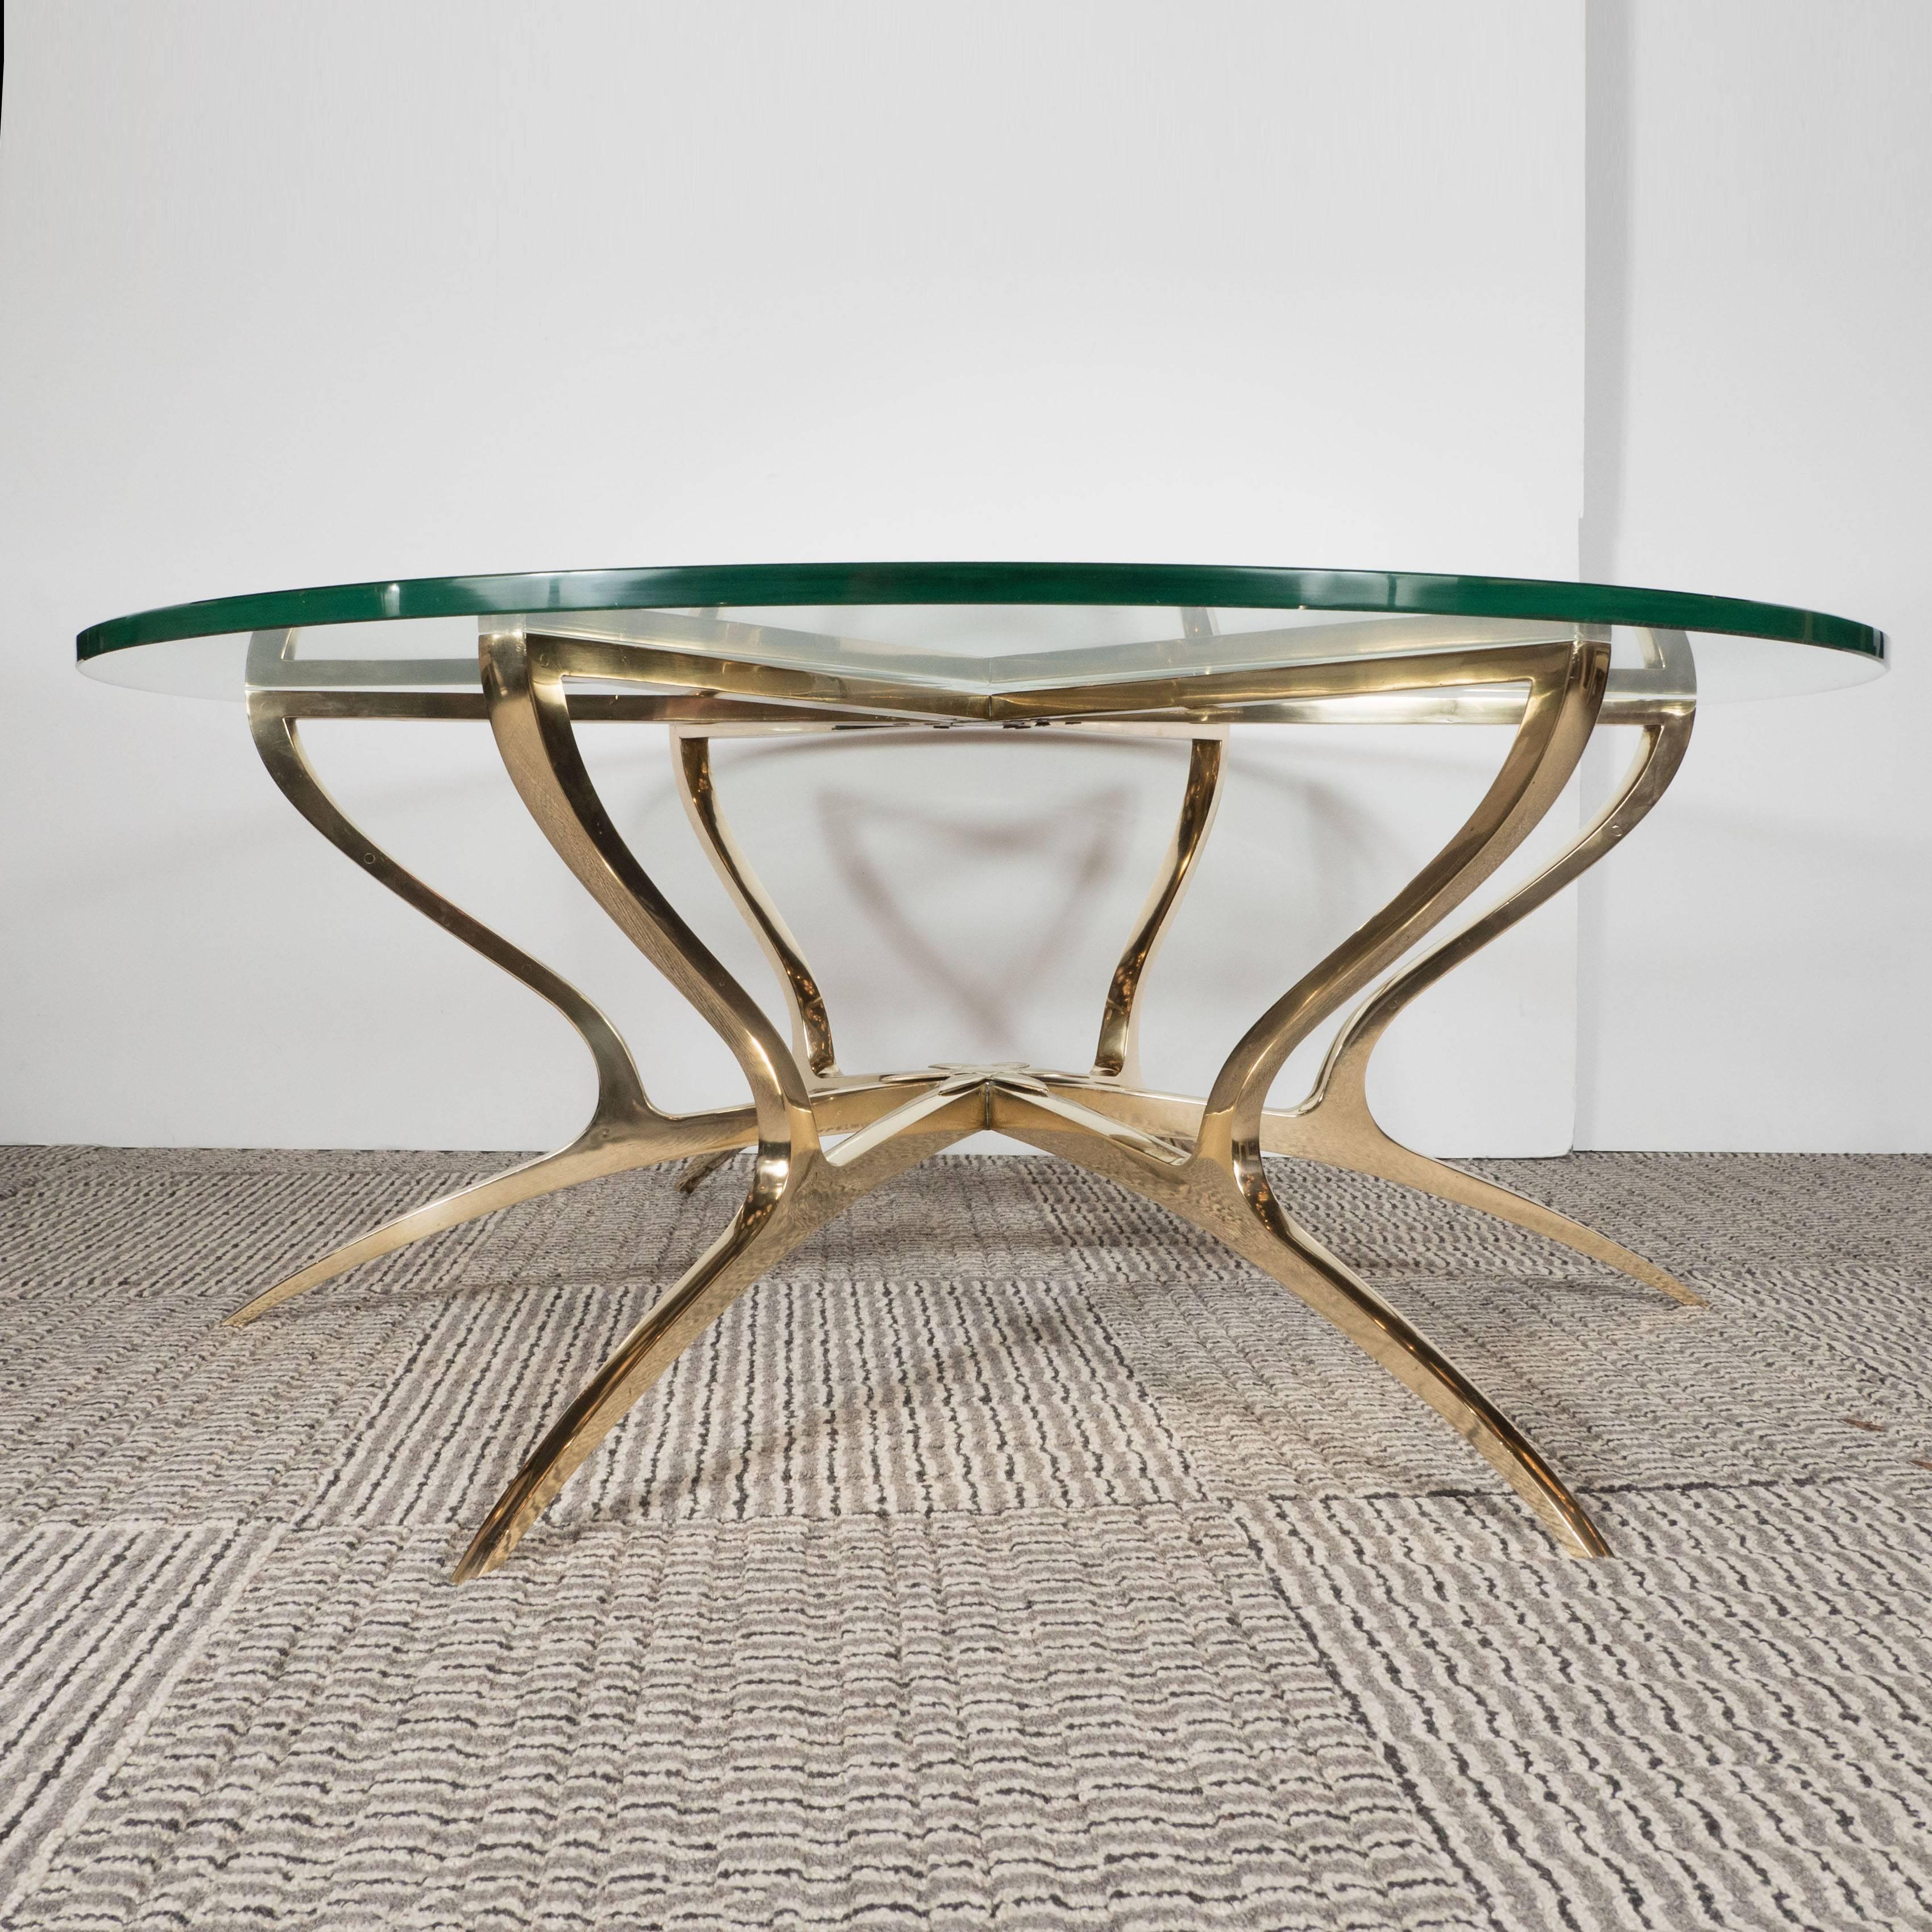 Created in Italy, circa 1970, this sculptural cocktail table features six solid brass saber legs. They extend from a central base adorned with a stylized lotus blossom. A curvilinear support extends from each leg, meeting straight arms at a